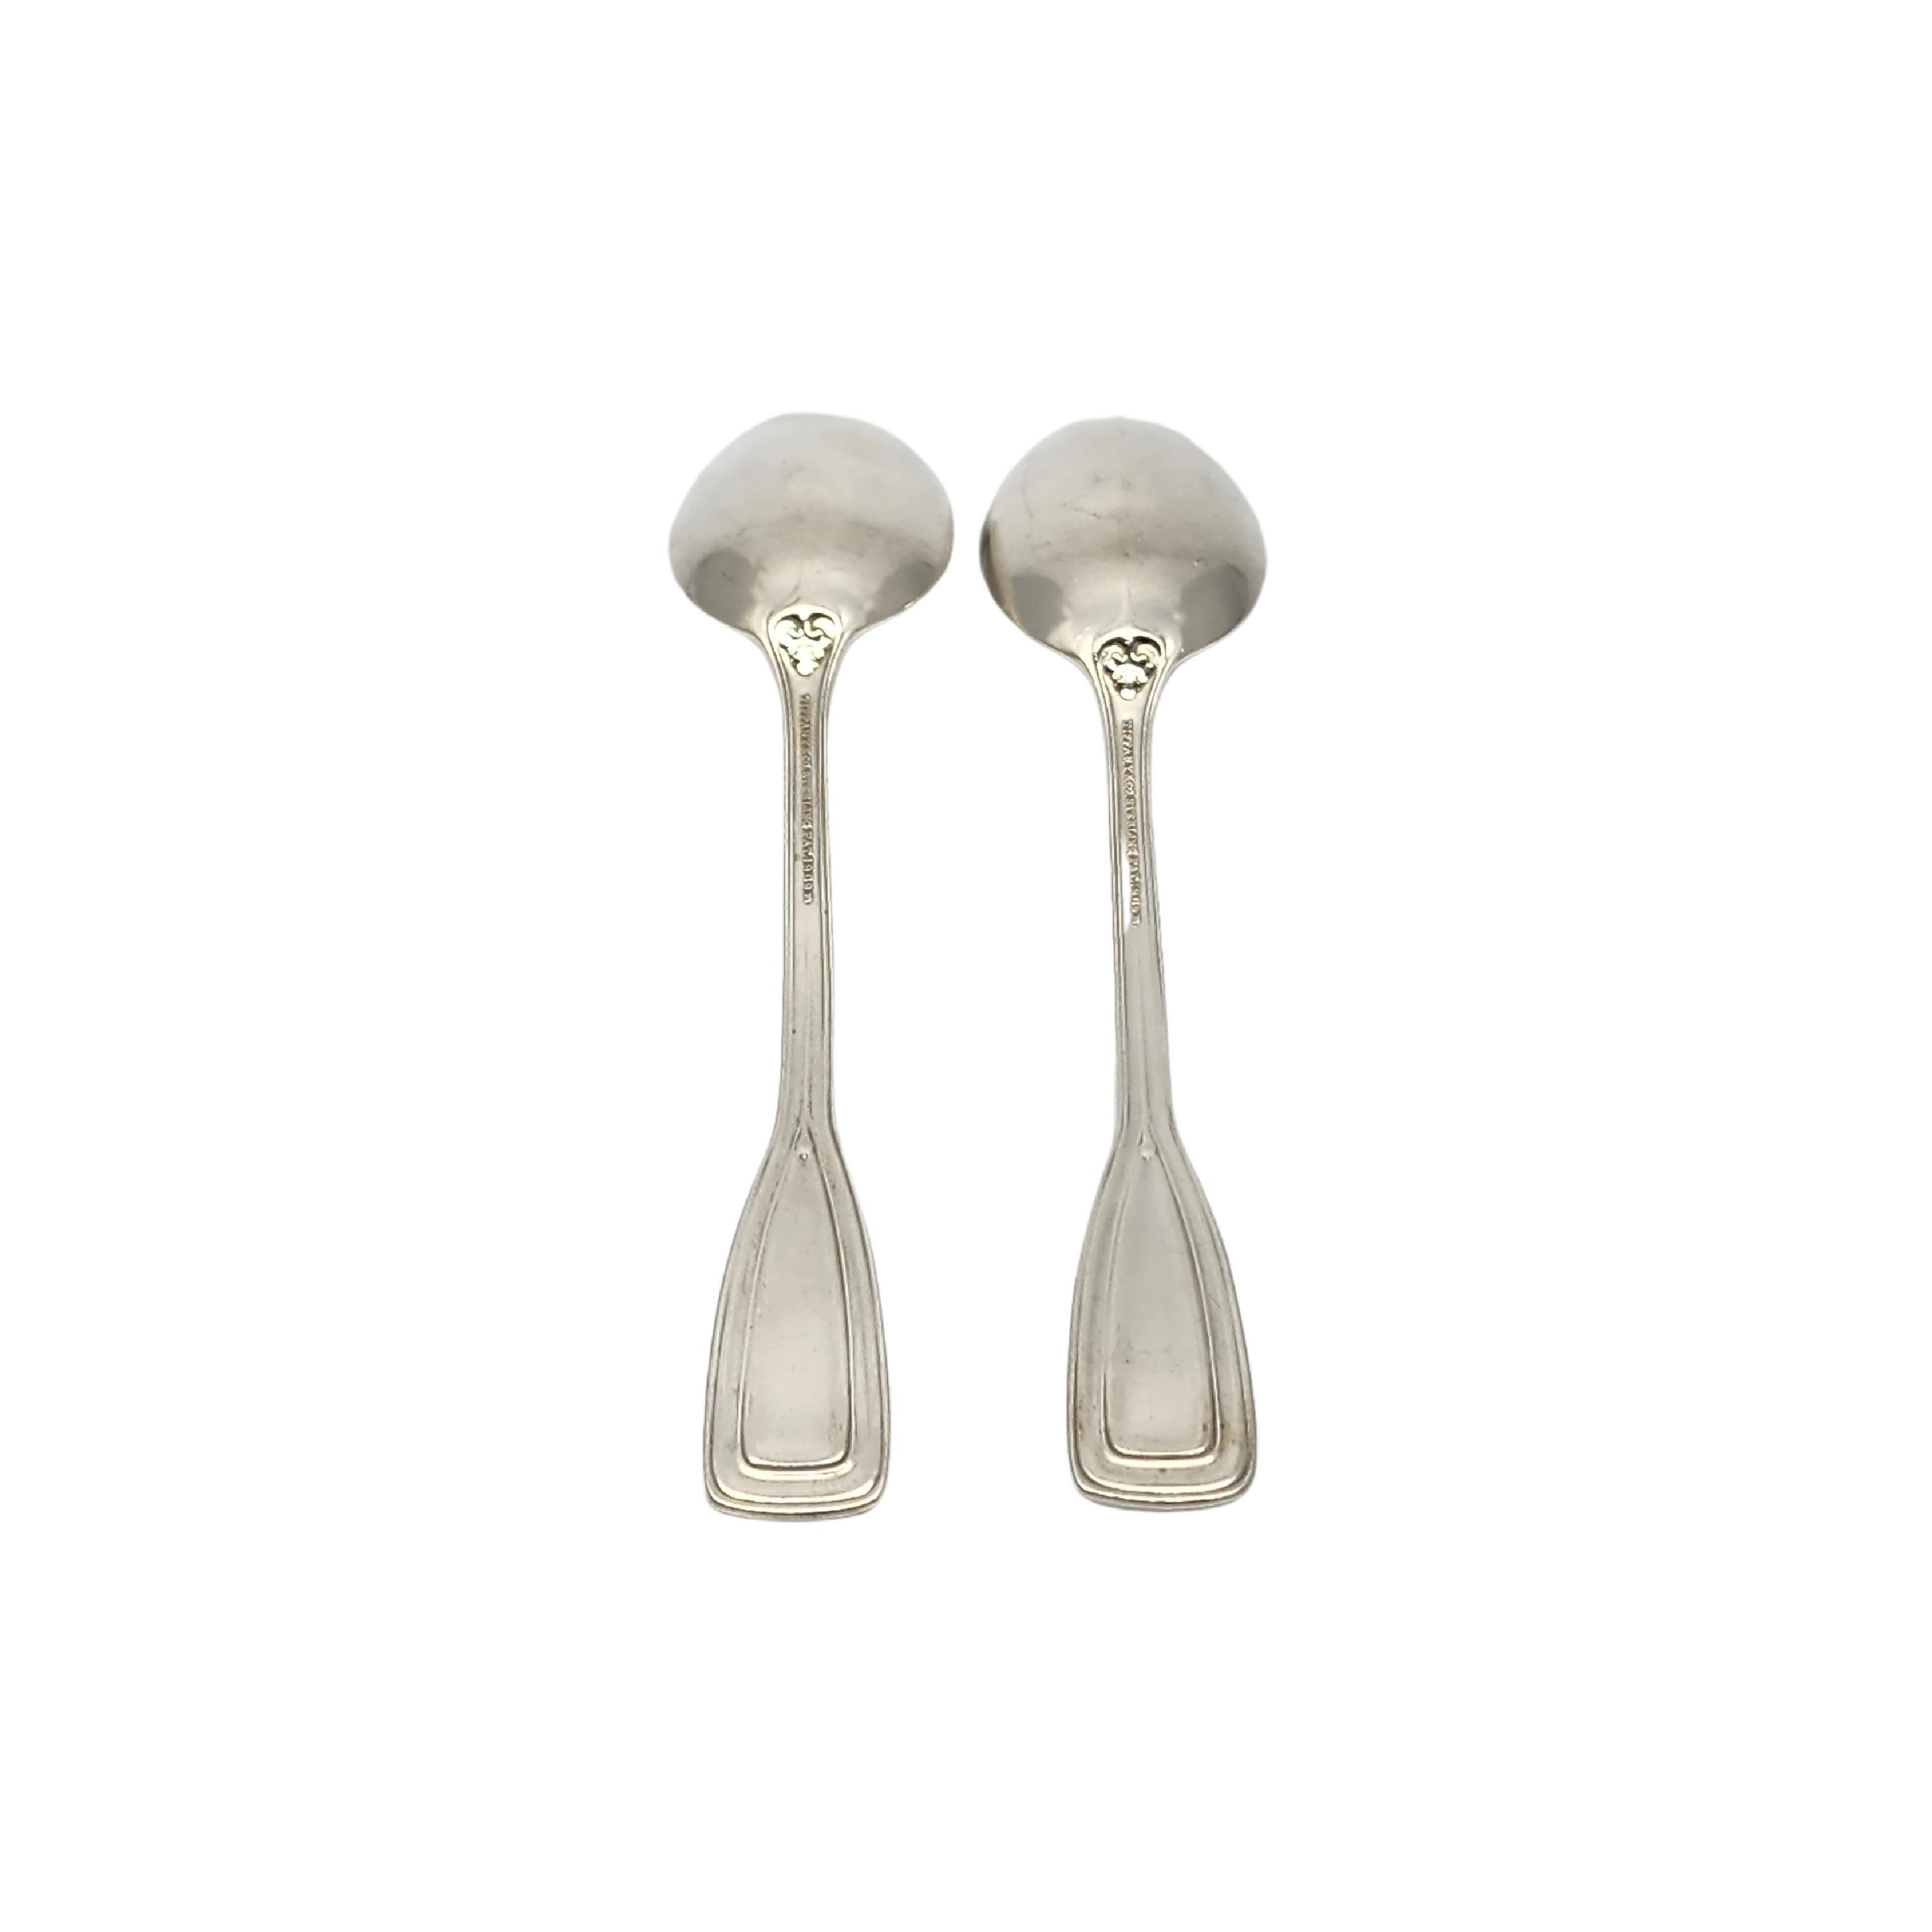 Set of 2 sterling silver place/oval soup spoons by Tiffany & Co in the St. Dunstan pattern with monogram.

Monogram appears to be W

Designed by Albert A. Southwick in 1909 and named for the patron saint of gold and silversmiths, Tiffany's St.